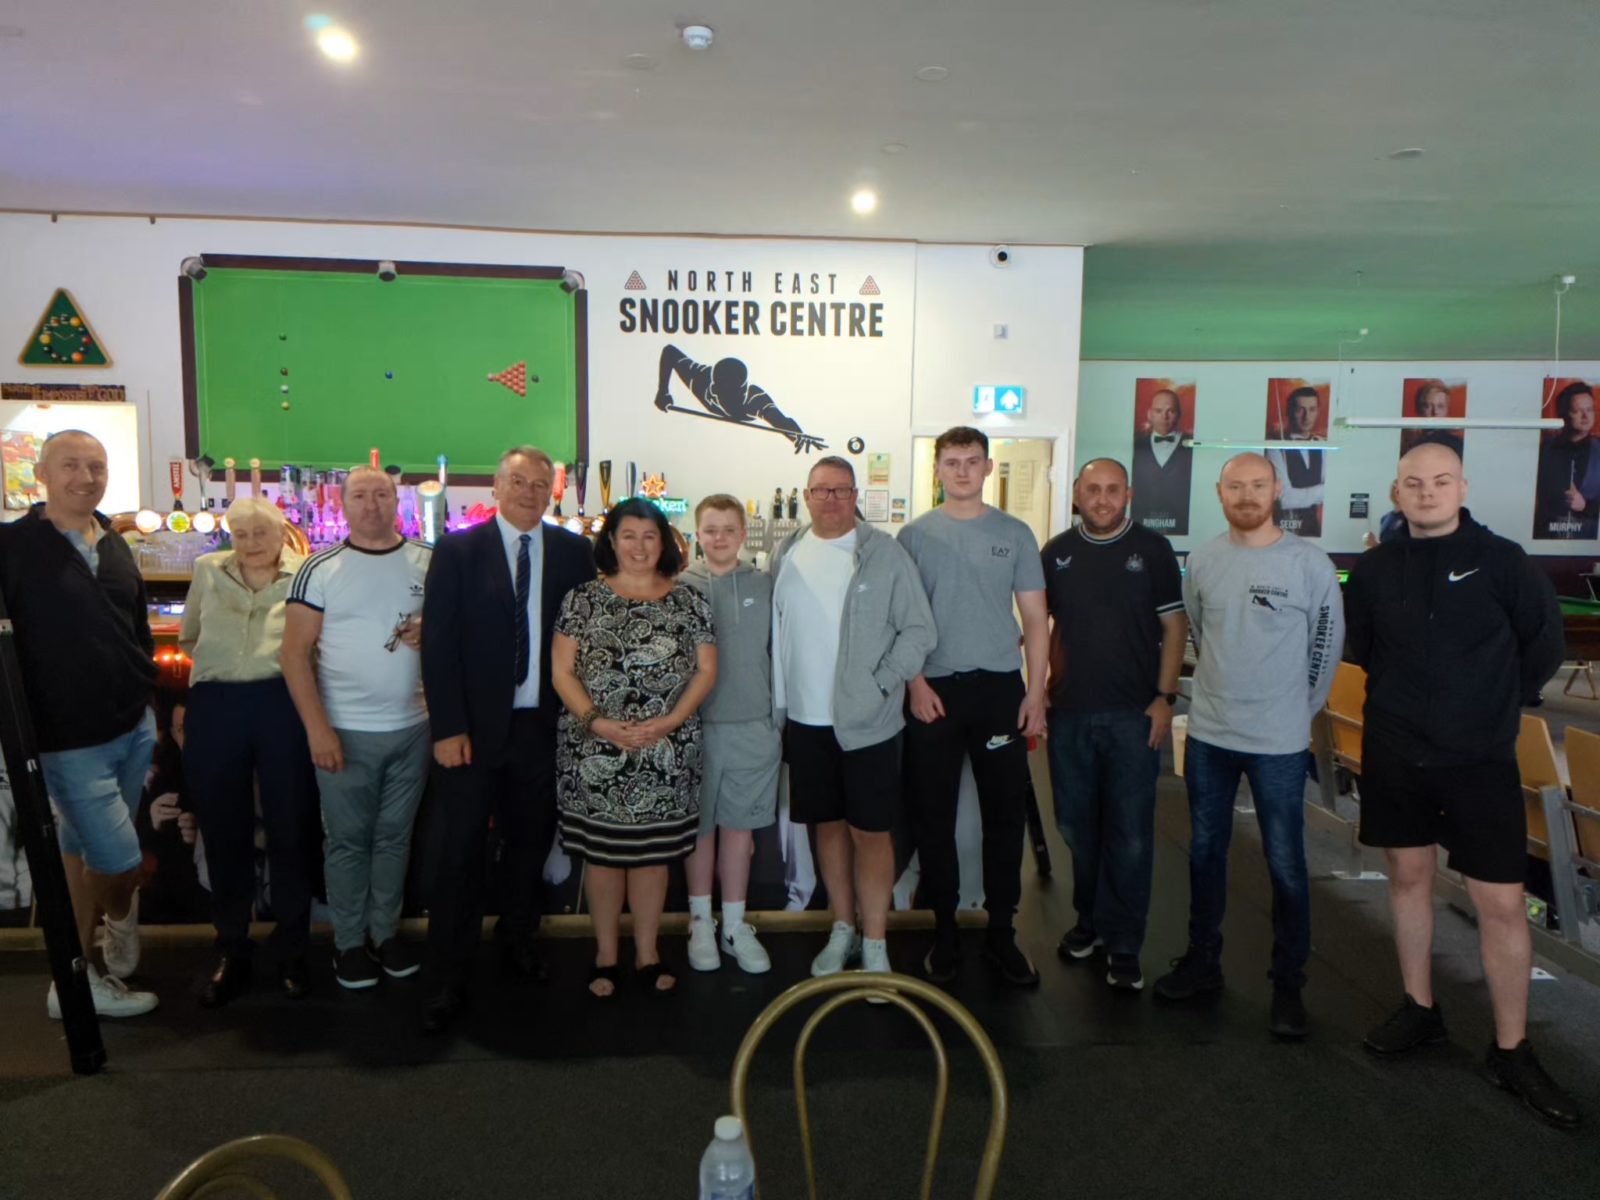 Alan Campbell and the team at the North East snooker centre